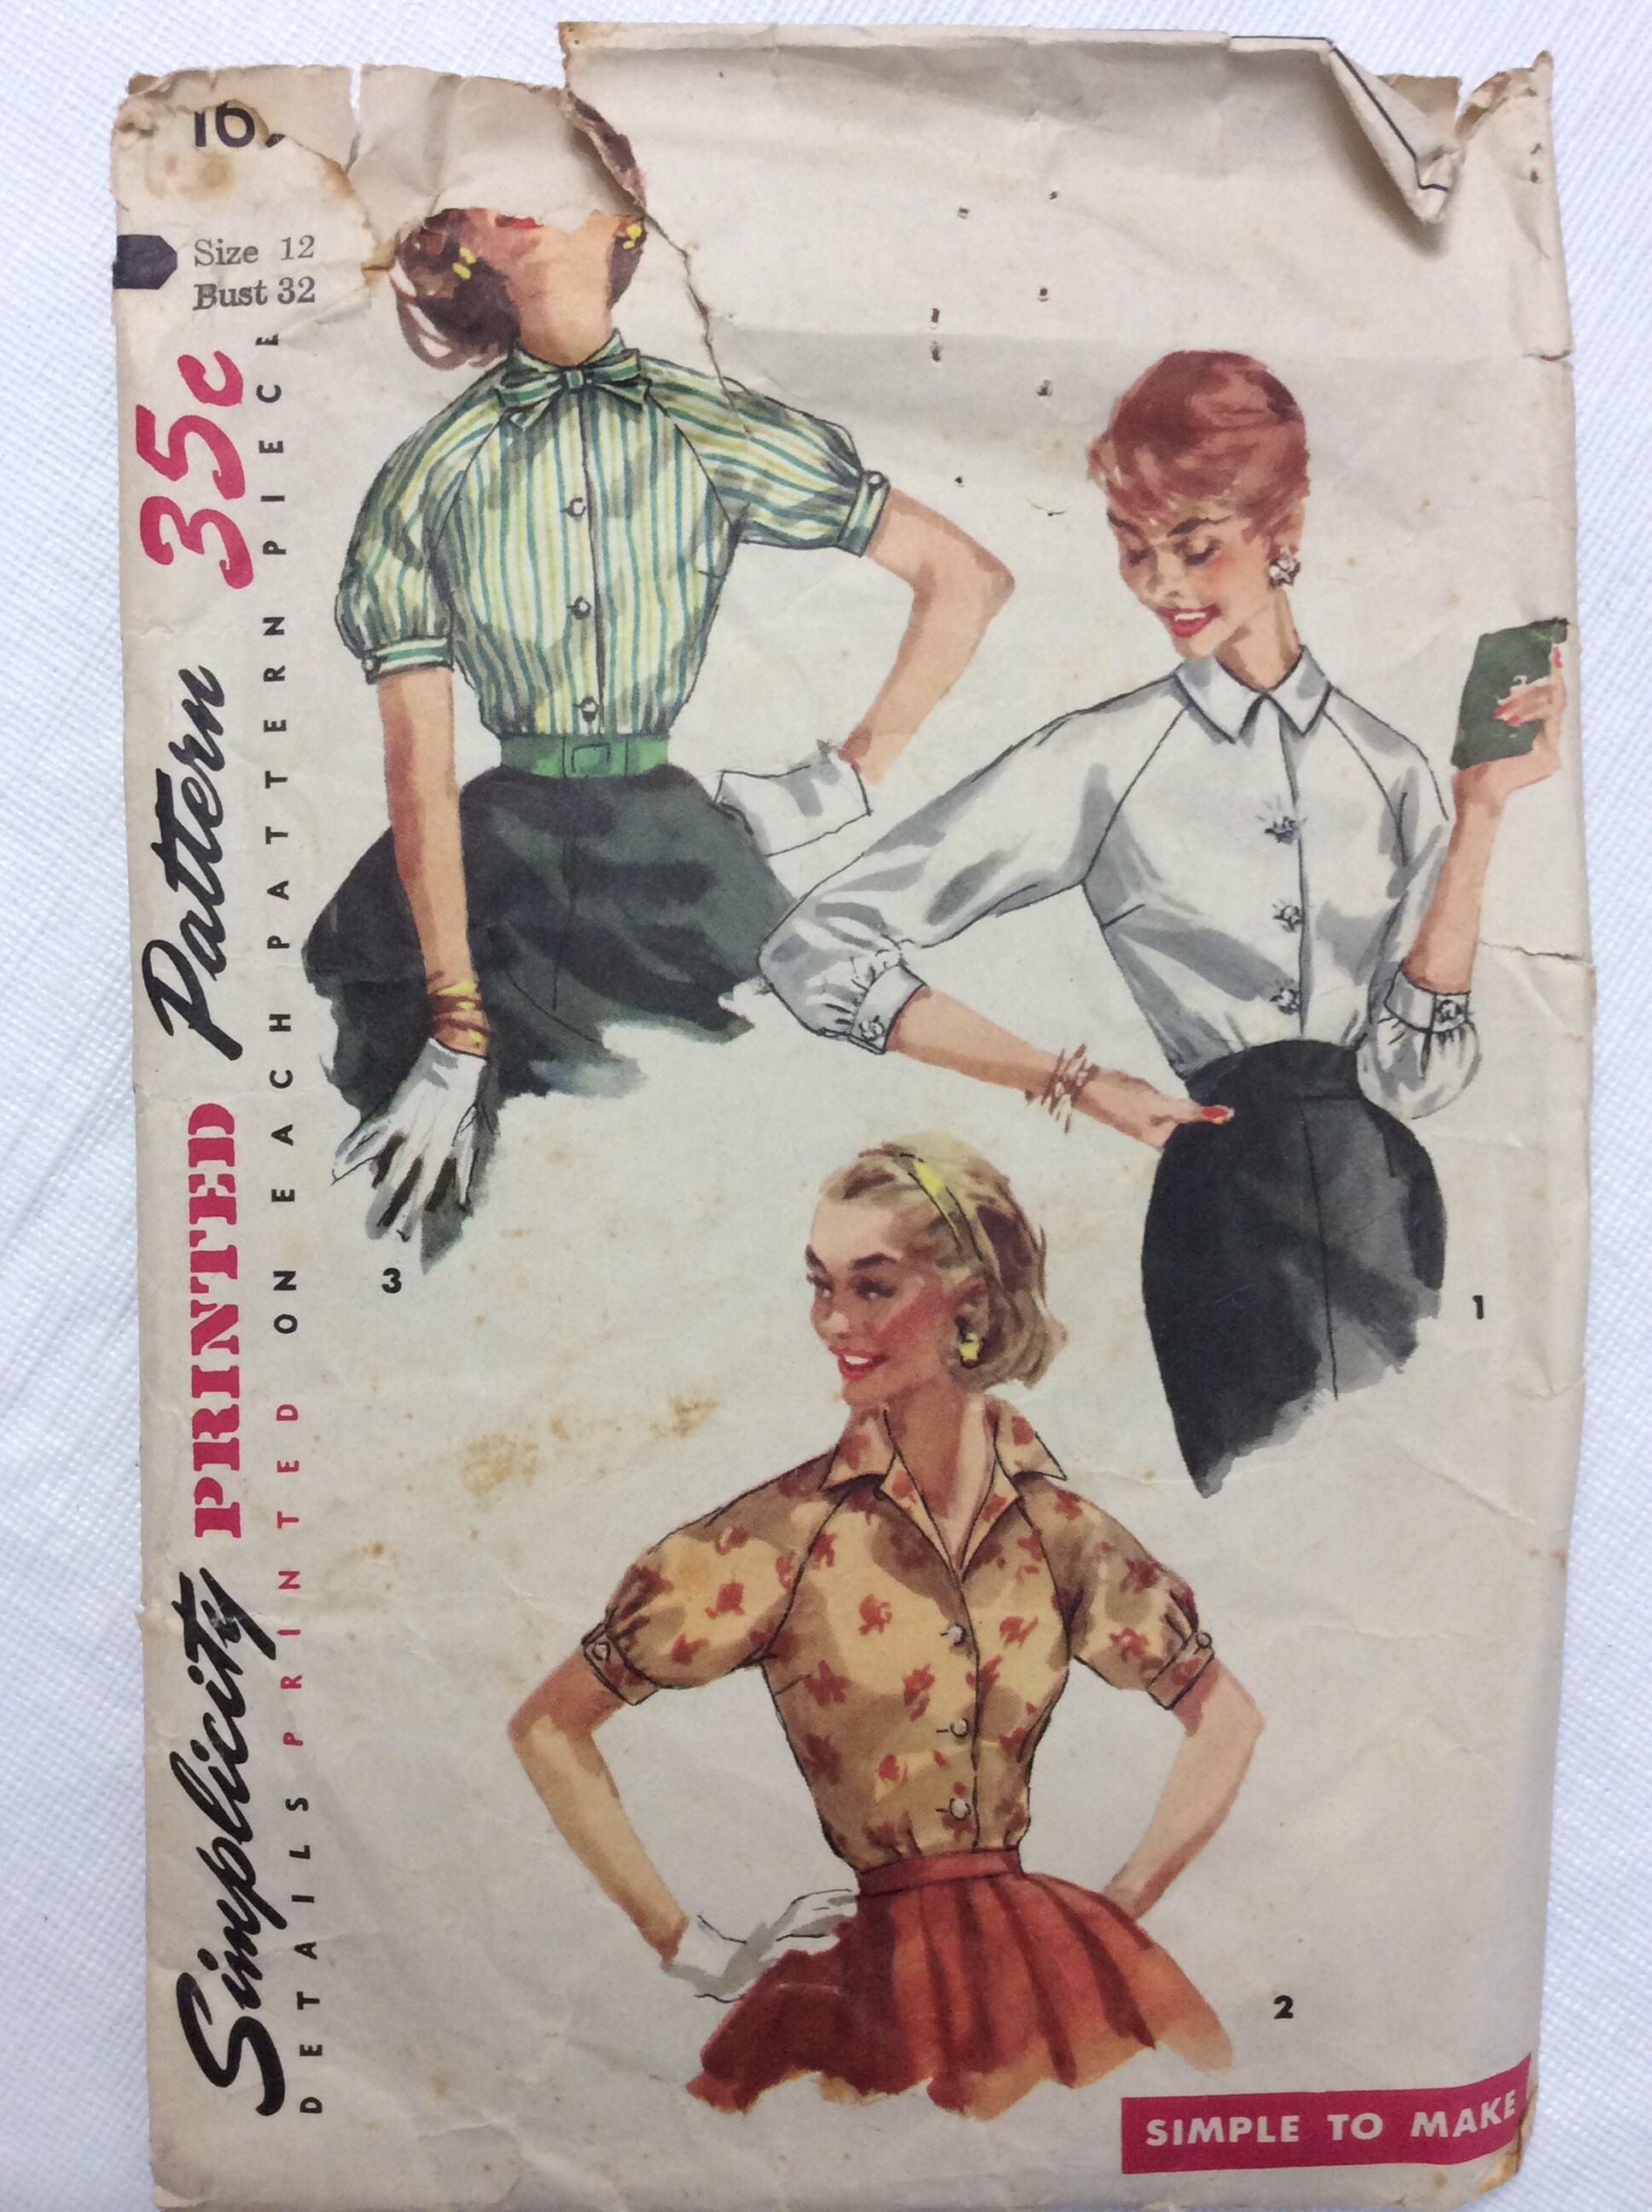 1956 Simplicity 1658 Women\u2019s Dress and Jacket sewing pattern-Size 12.5 Bust 33\u201d-Cut and complete Vintage ca but instructions damaged